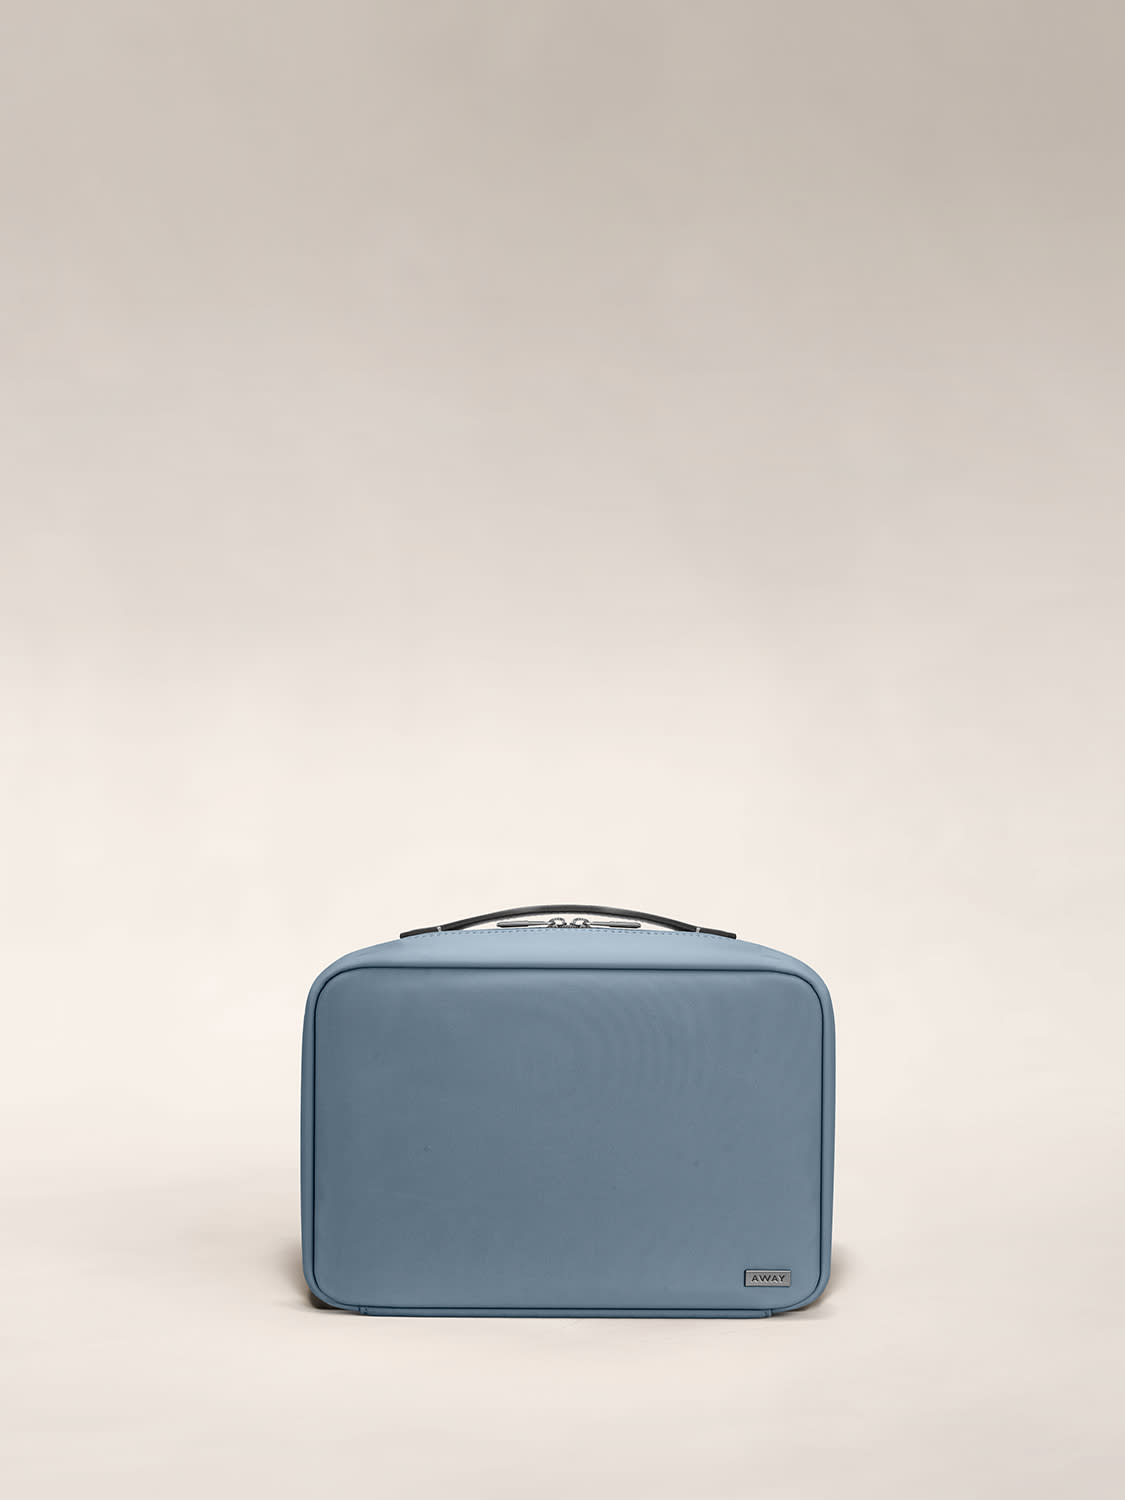 Front view of a coast blue toiletry bag with handle on top.